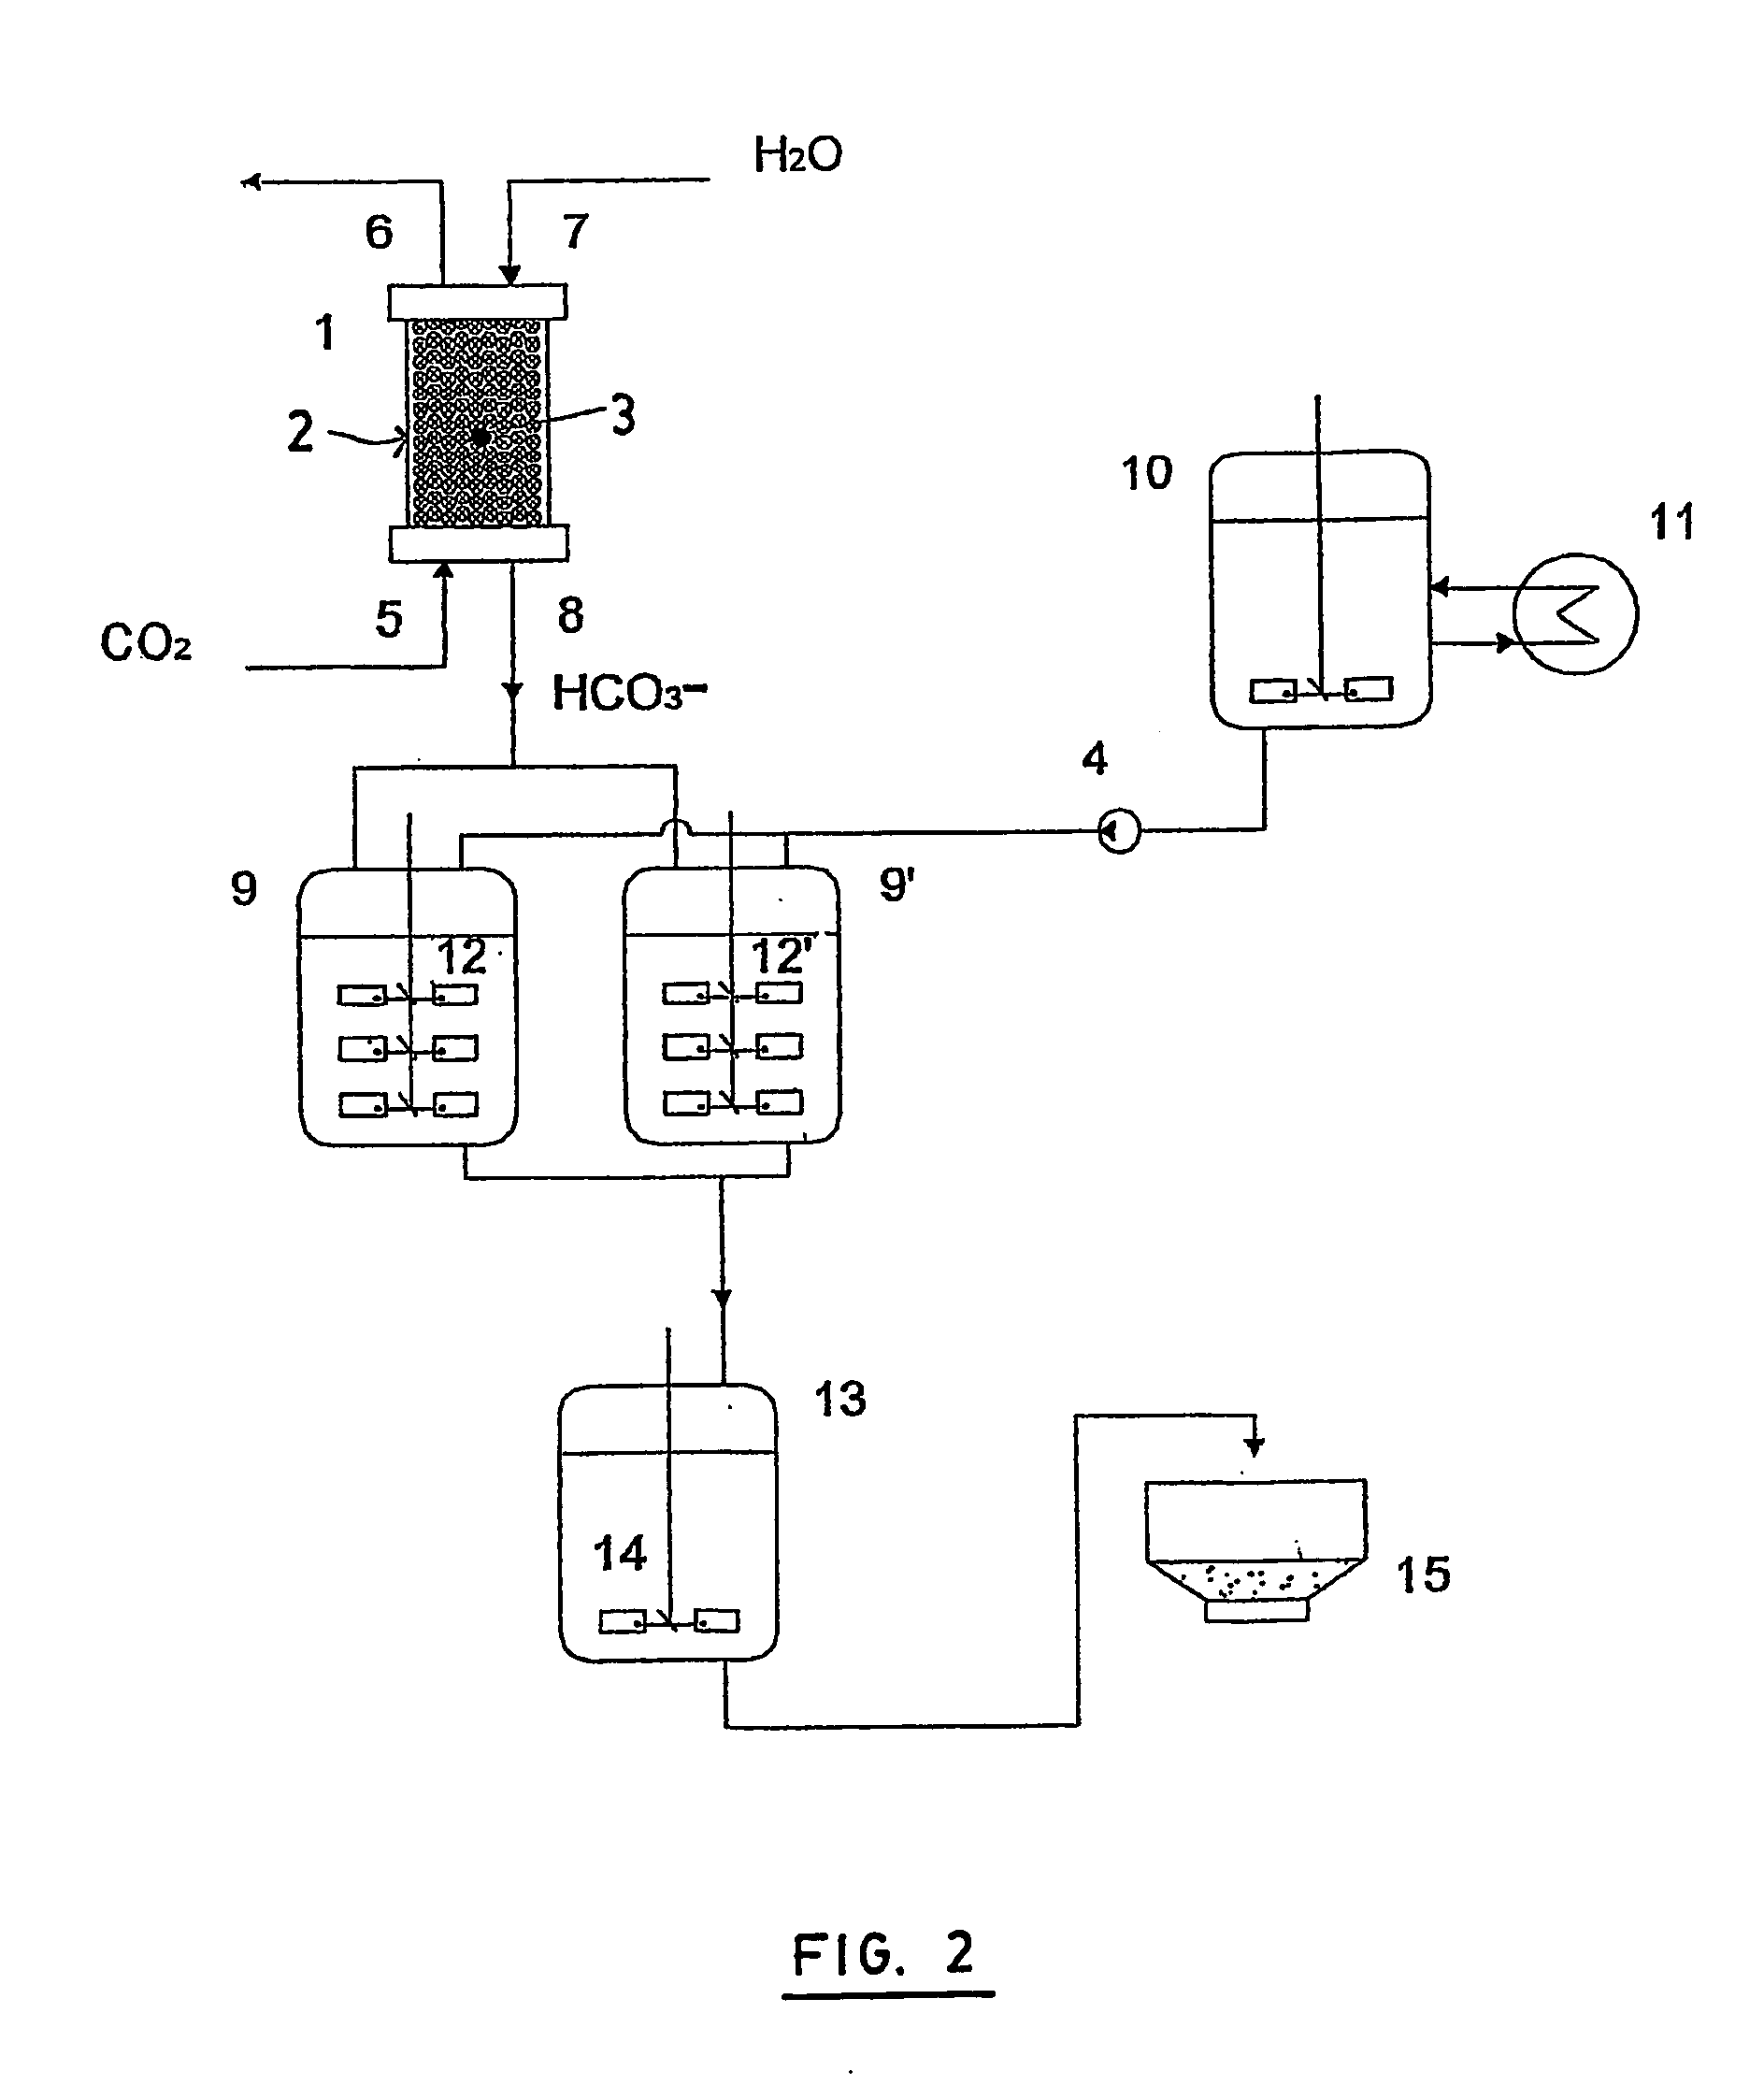 Process and an apparatus for producing calcium carbonate via an enzymatic pathway